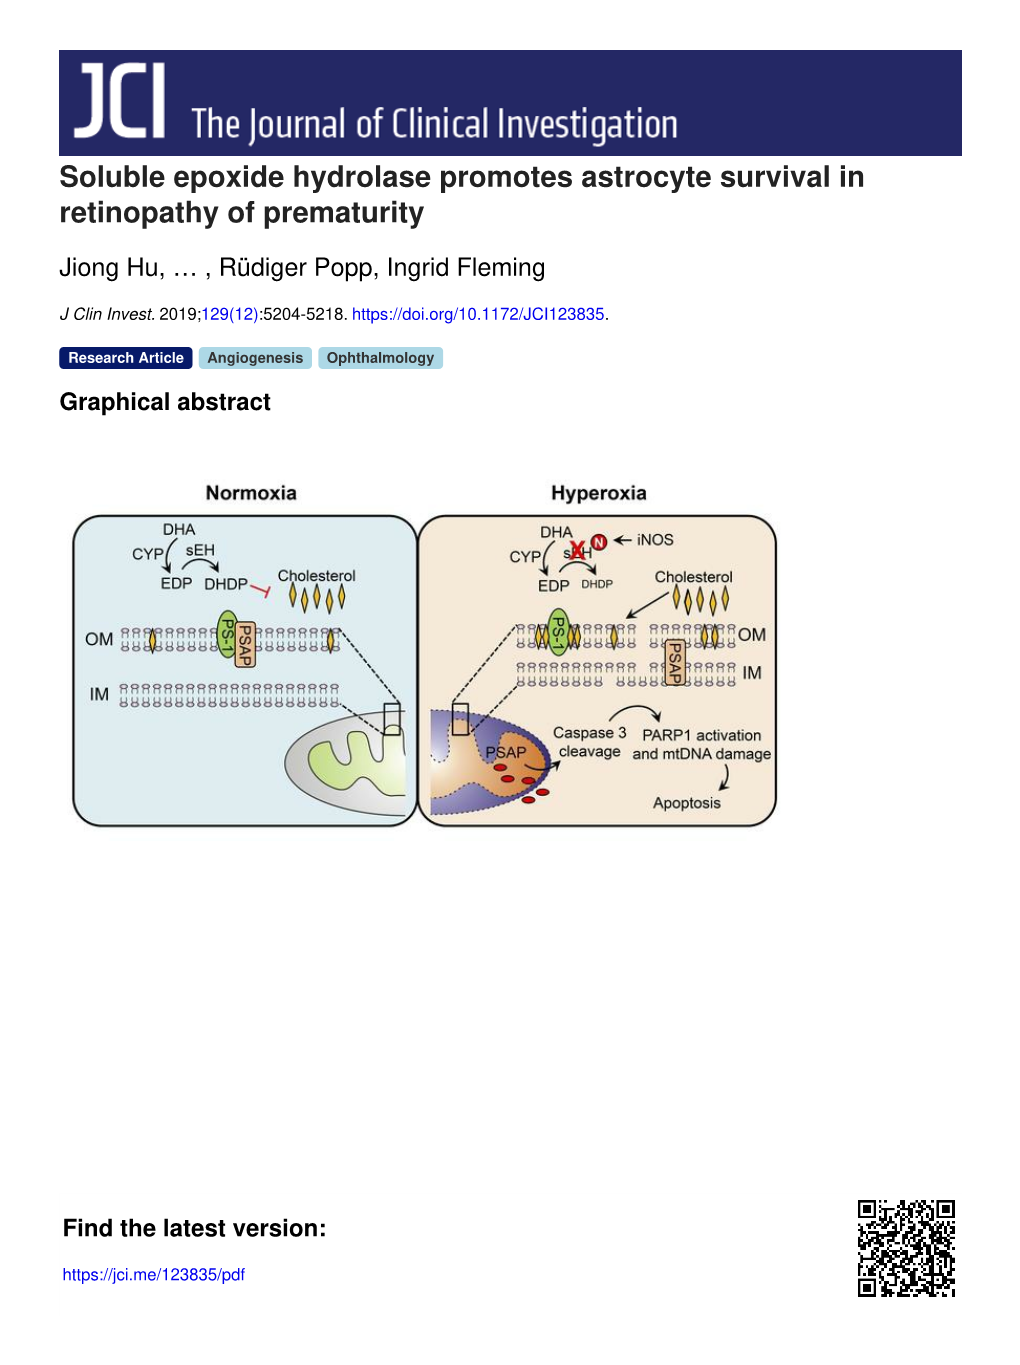 Soluble Epoxide Hydrolase Promotes Astrocyte Survival in Retinopathy of Prematurity